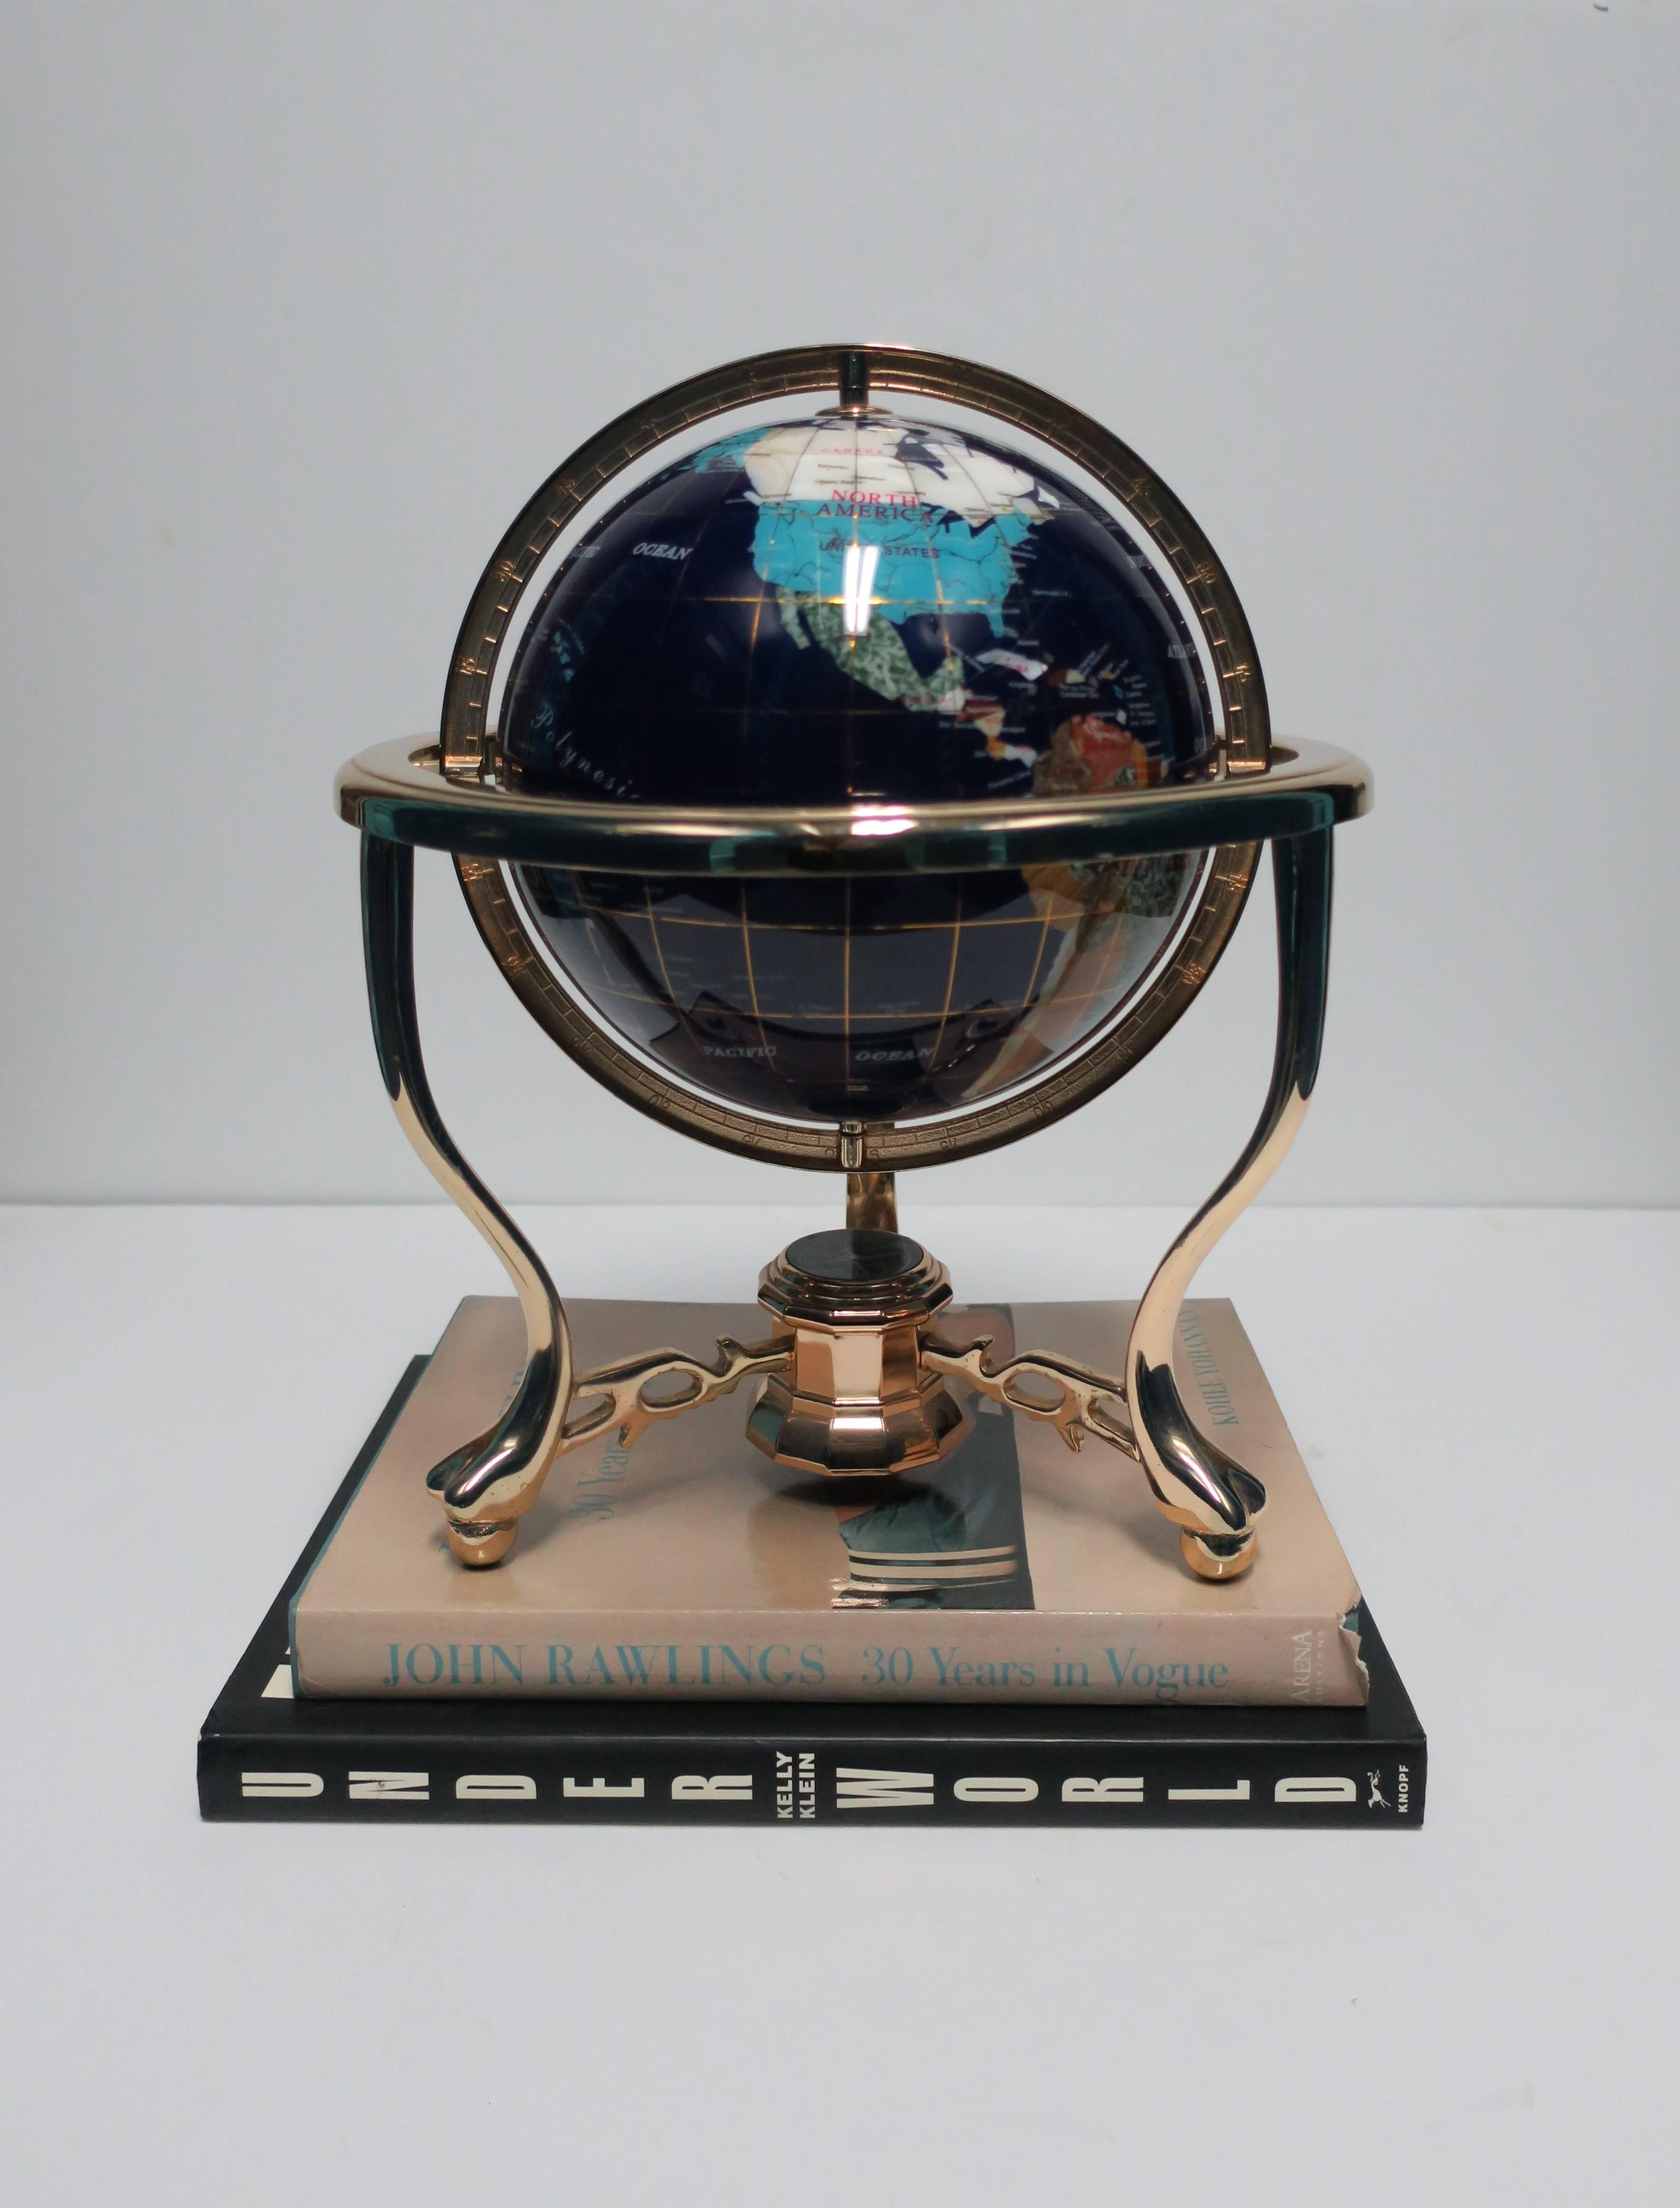 Vintage World Globe Of Marble and Onyx 2